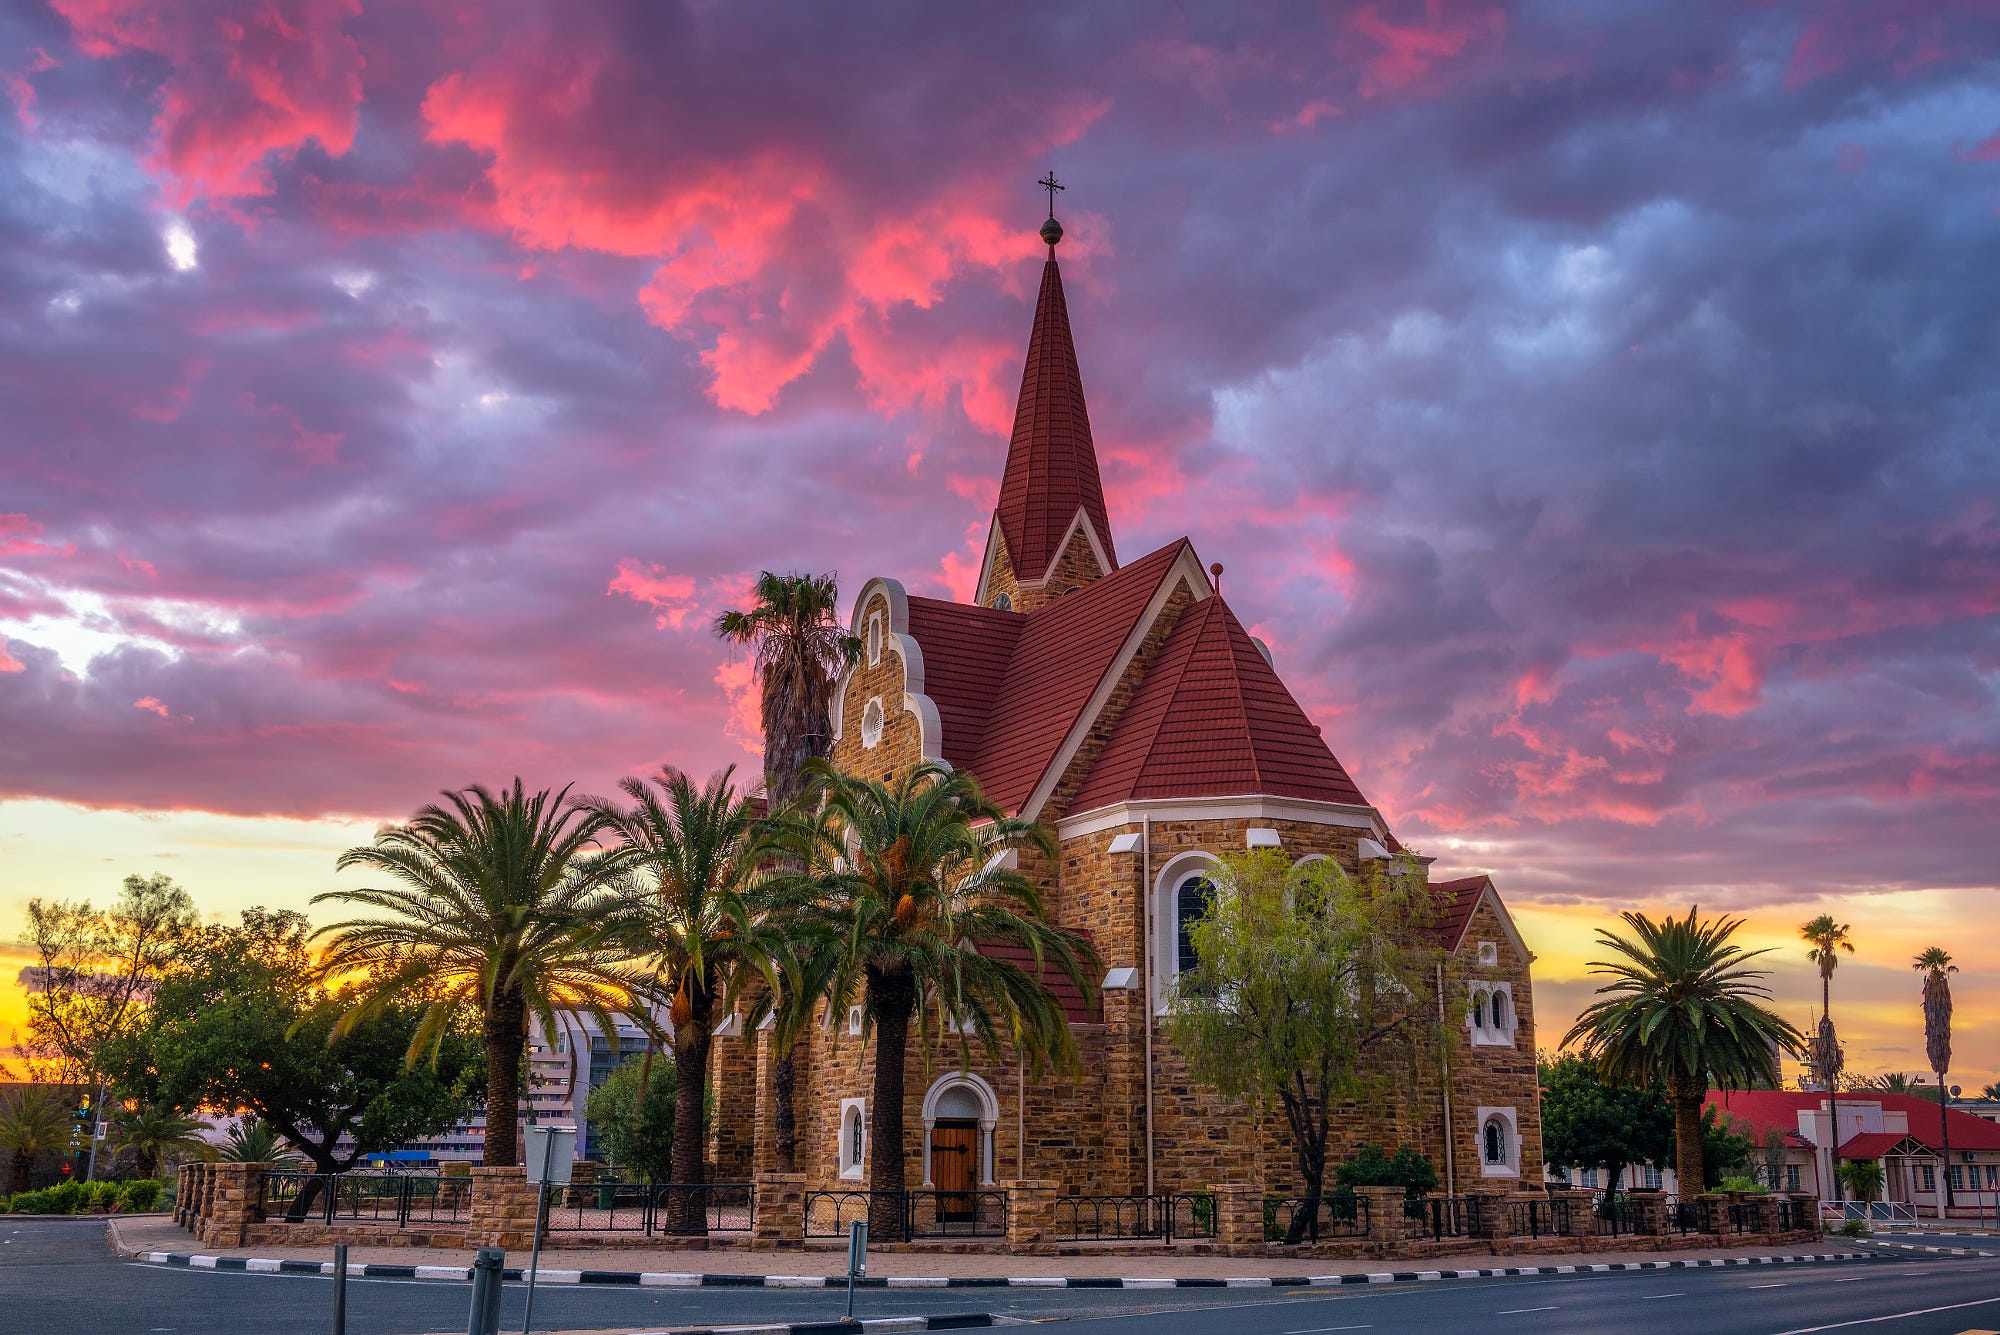 namibia, religious, church, architecture, cloud, evening, palm tree, sunset, churches